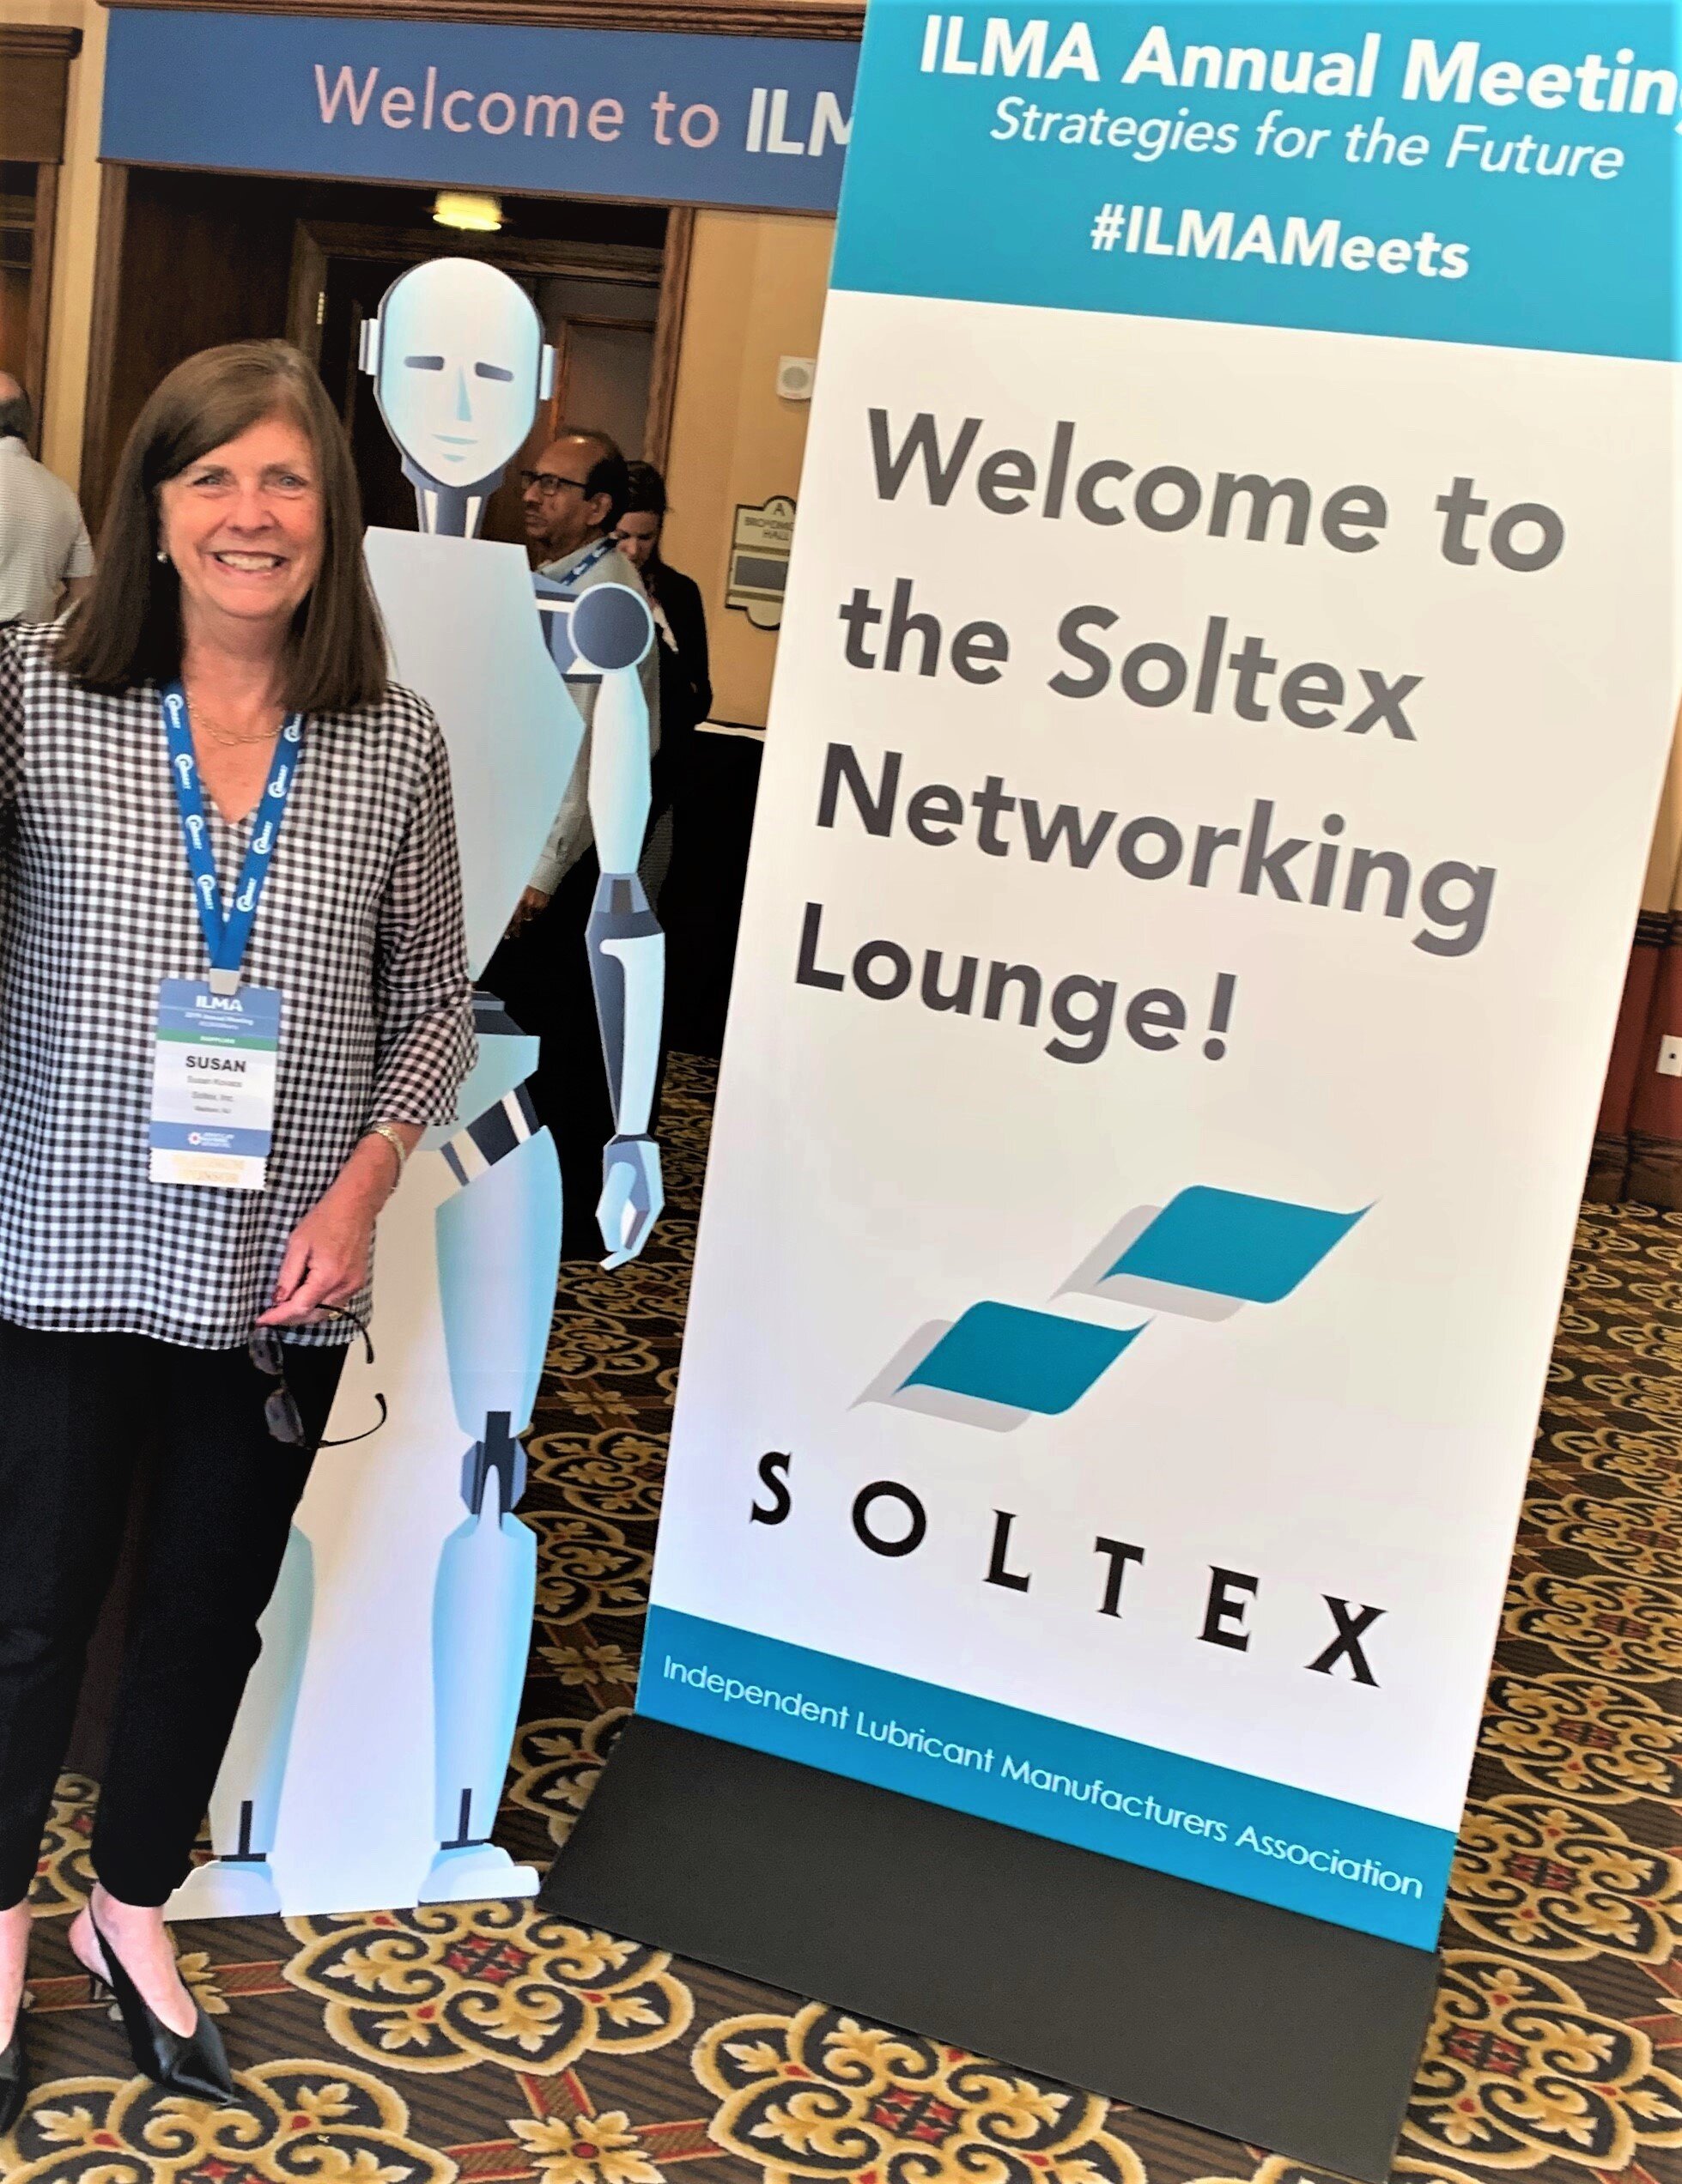 Reflections on 3 Decades at Soltex Inc. with Susan Kovacs, Vice President of Sales at Soltex, Inc.